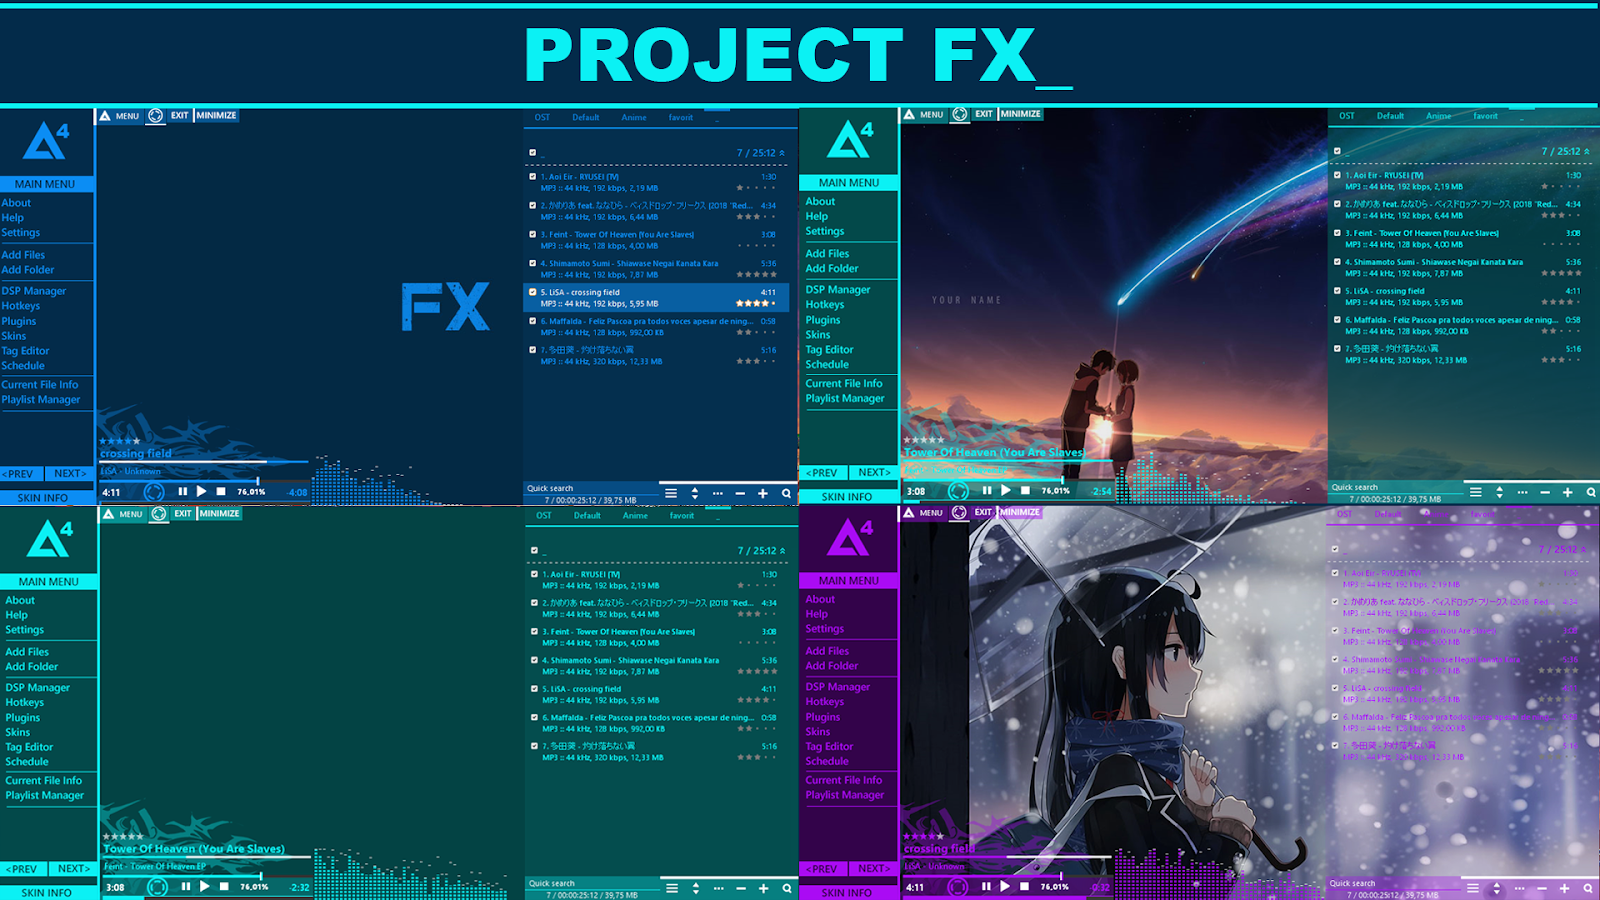 Aimp4 Skin Project Fx With Anime Background Provided Frostx